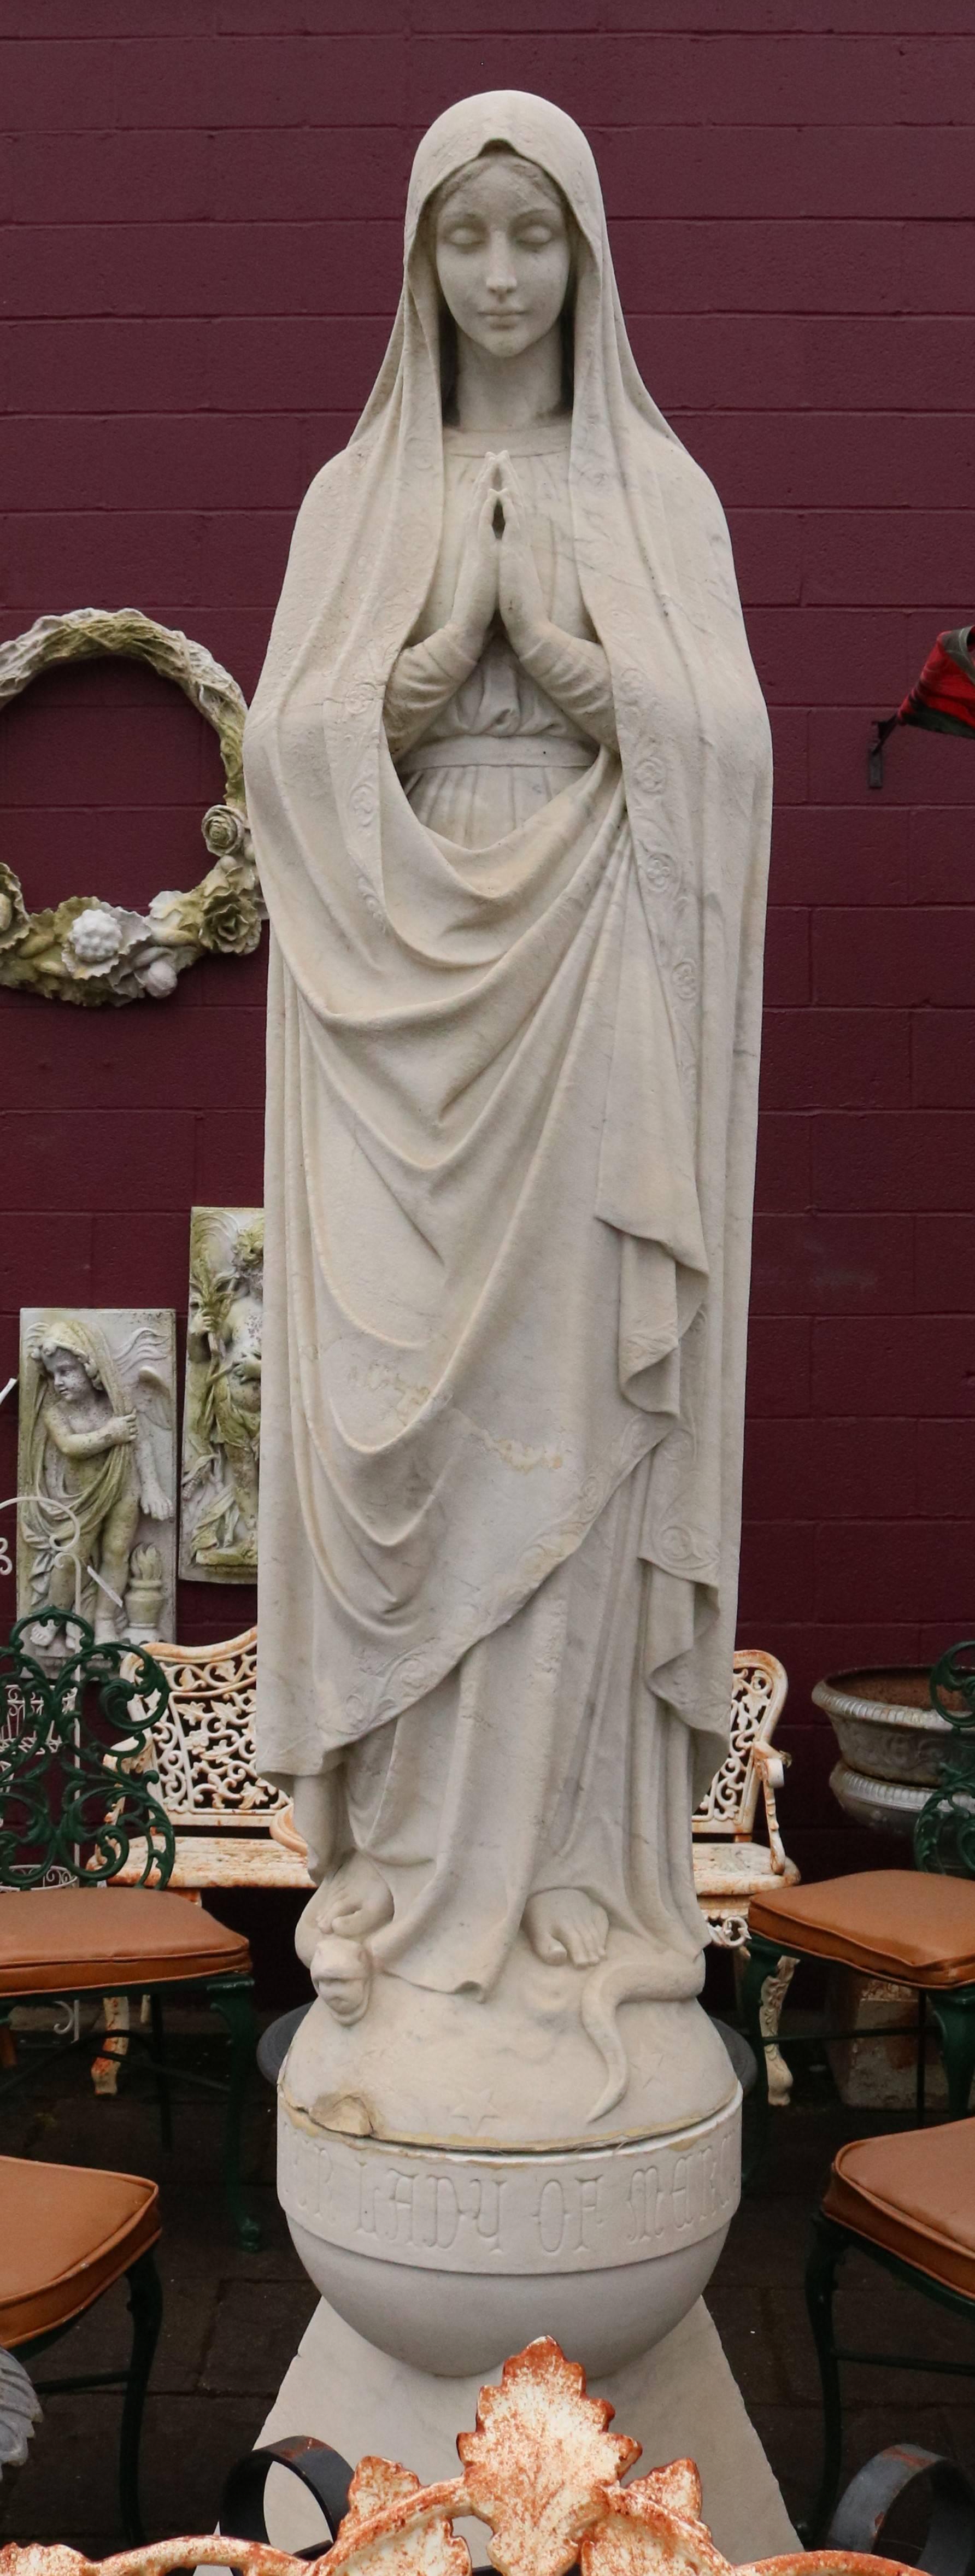 Monumental fine exterior Italian marble statue depicts Mother Mary with serpent with apple under foot, features high detail and incised 